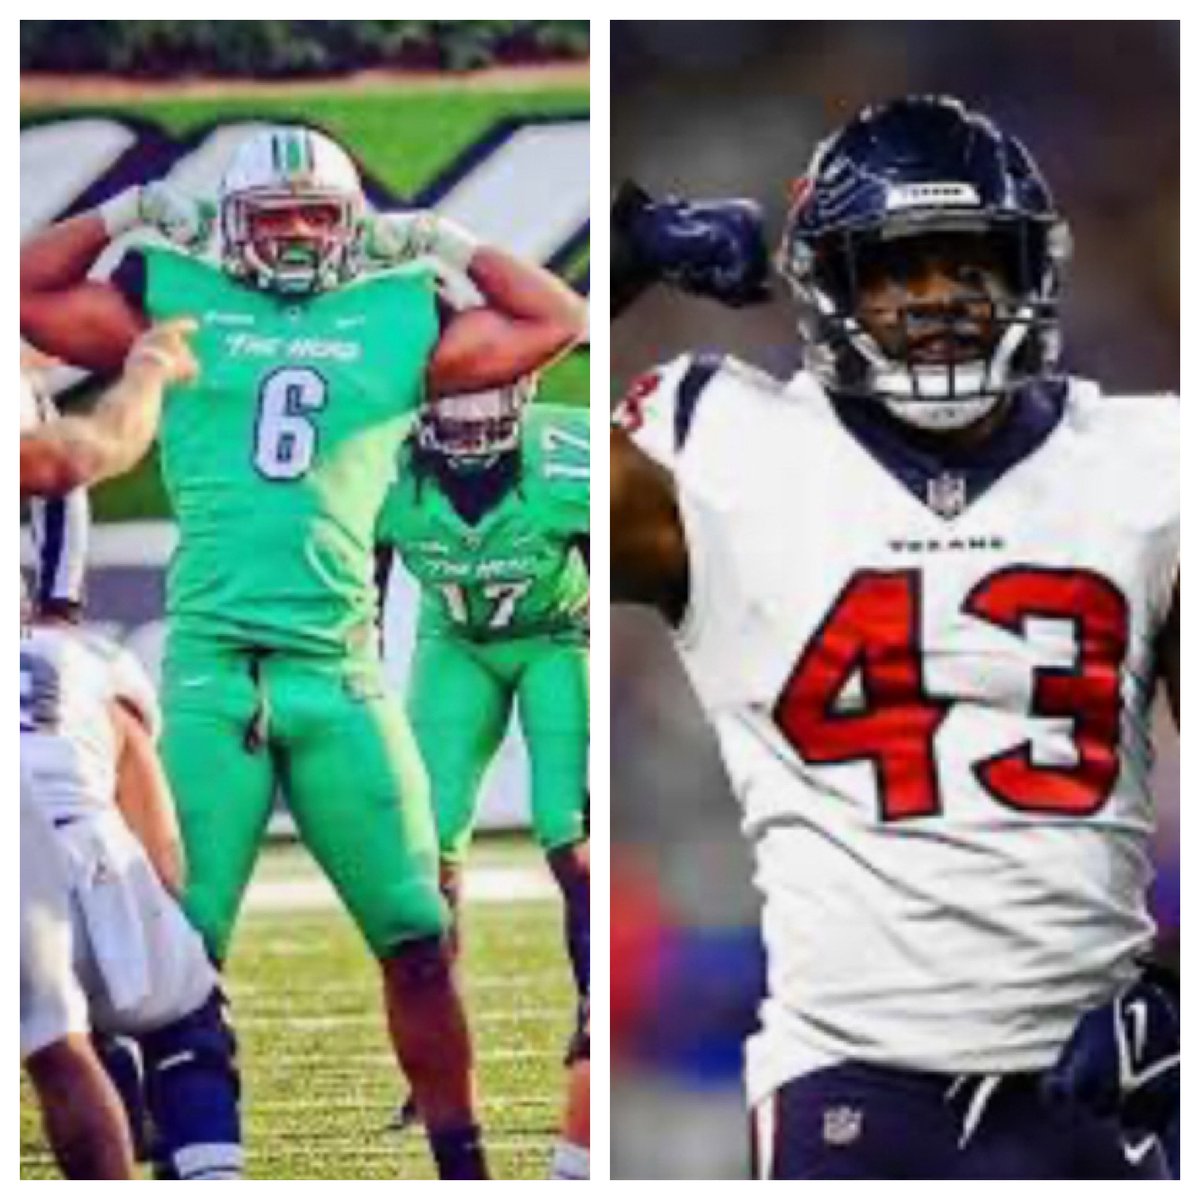 Congratulations to former @HerdFB LB great @Neville_Hewitt (2013-2014) and @HoustonTexans on making the @NFL playoffs. Exceptional player, teammate, but an even better person. #HerdFamily #OneHerd #HerdBrotherhood